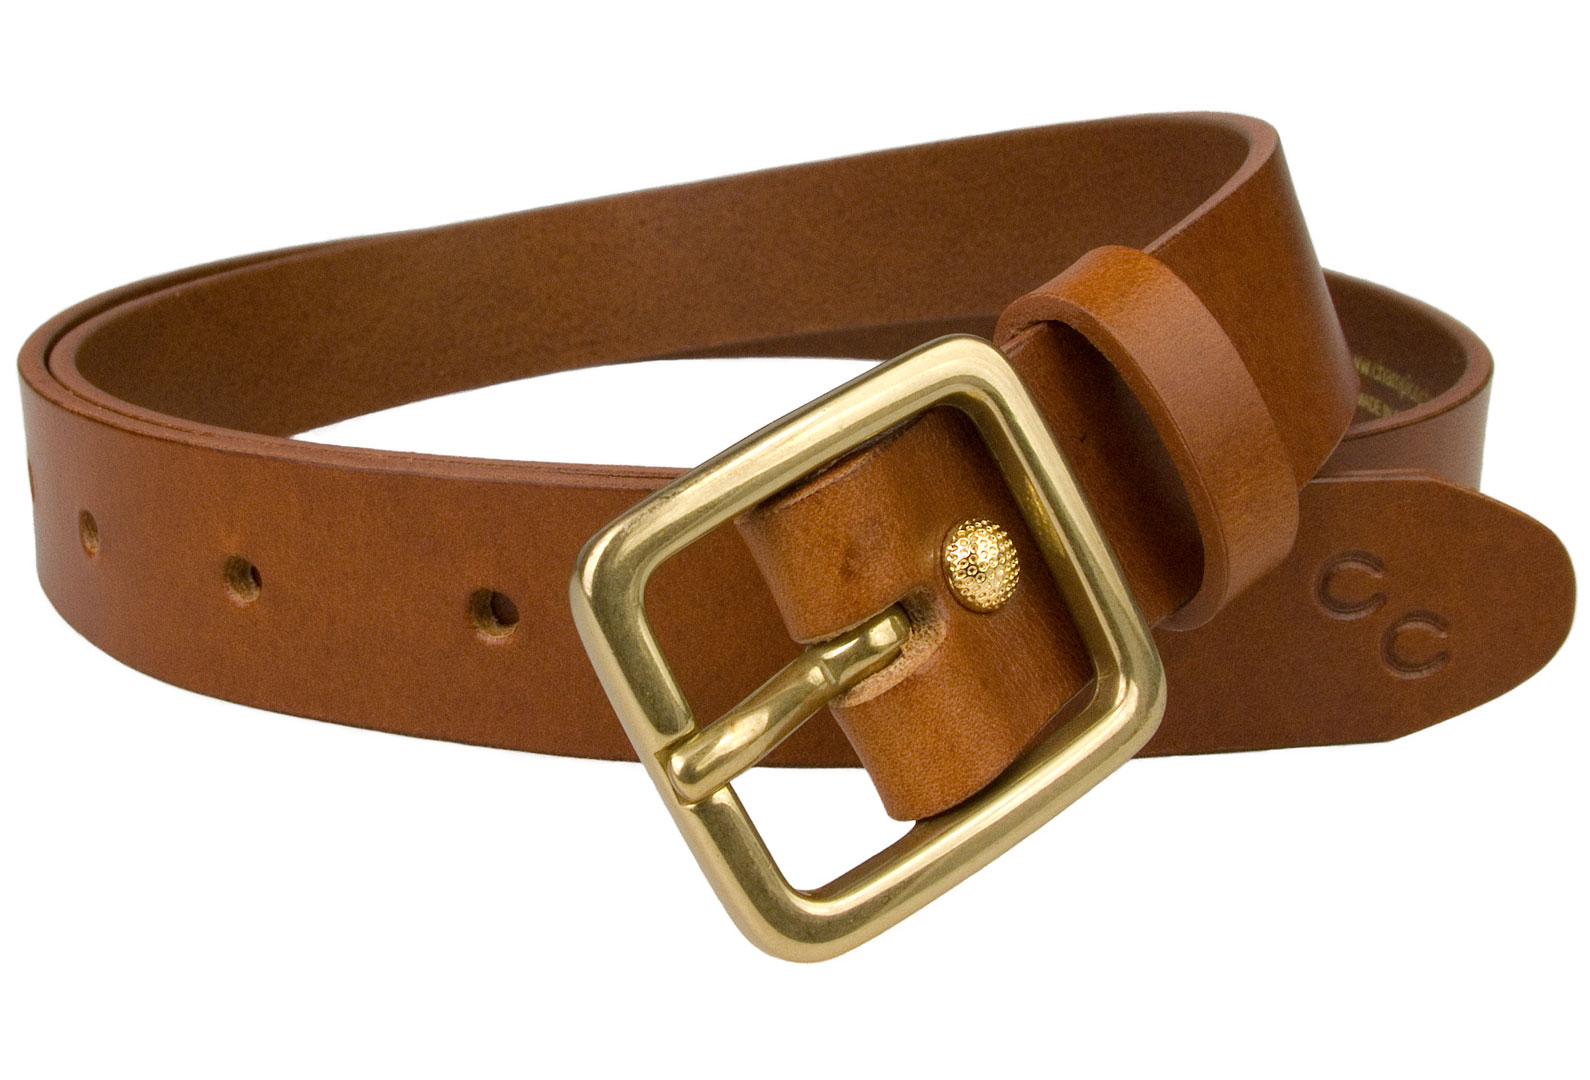 Womens Narrow Tan Leather Belt Solid Brass Buckle - Champion Chase